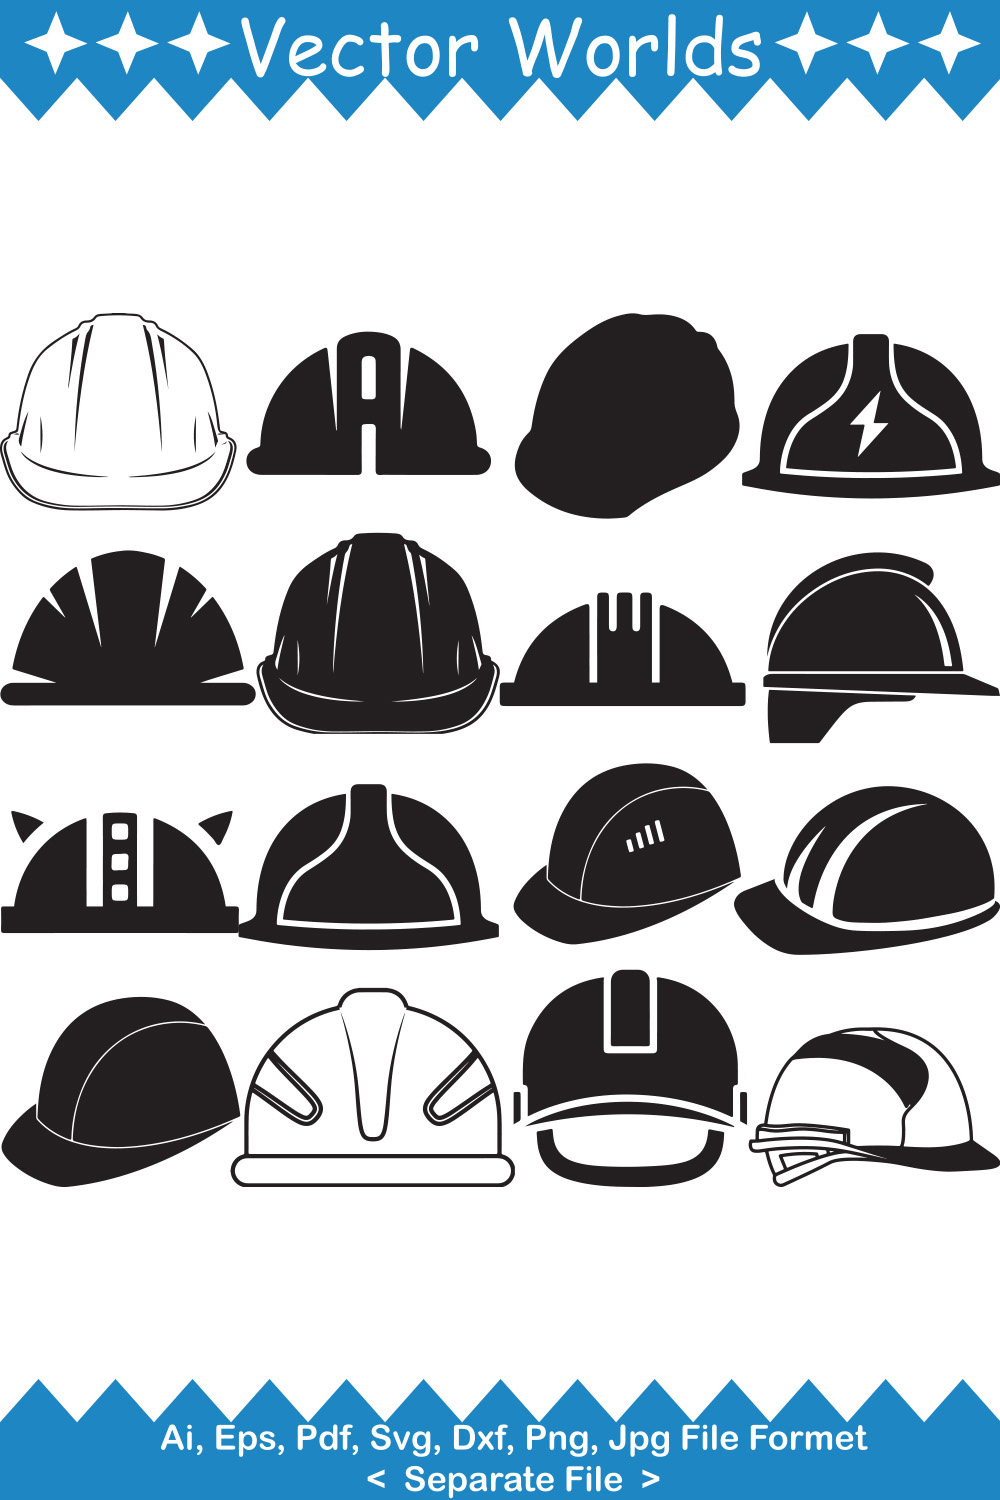 Collection of vector wonderful images of hard hat silhouettes.